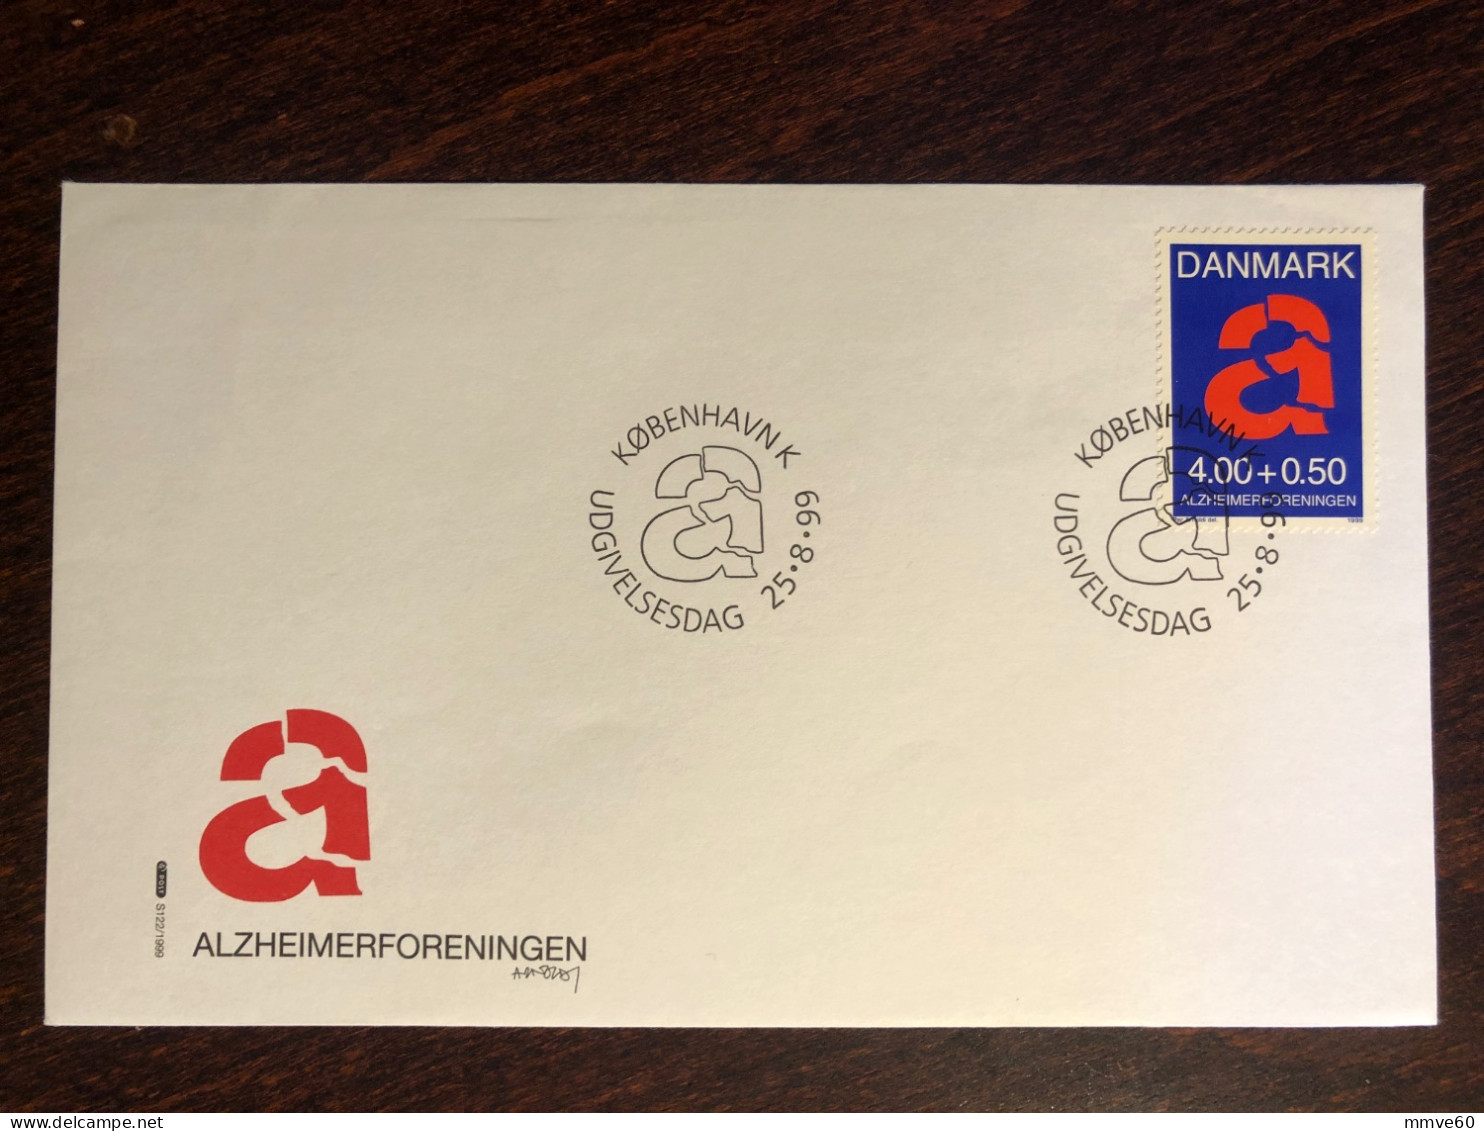 DENMARK FDC COVER 1999 YEAR ALZHEIMER PSYCHIATRY HEALTH MEDICINE STAMPS - FDC